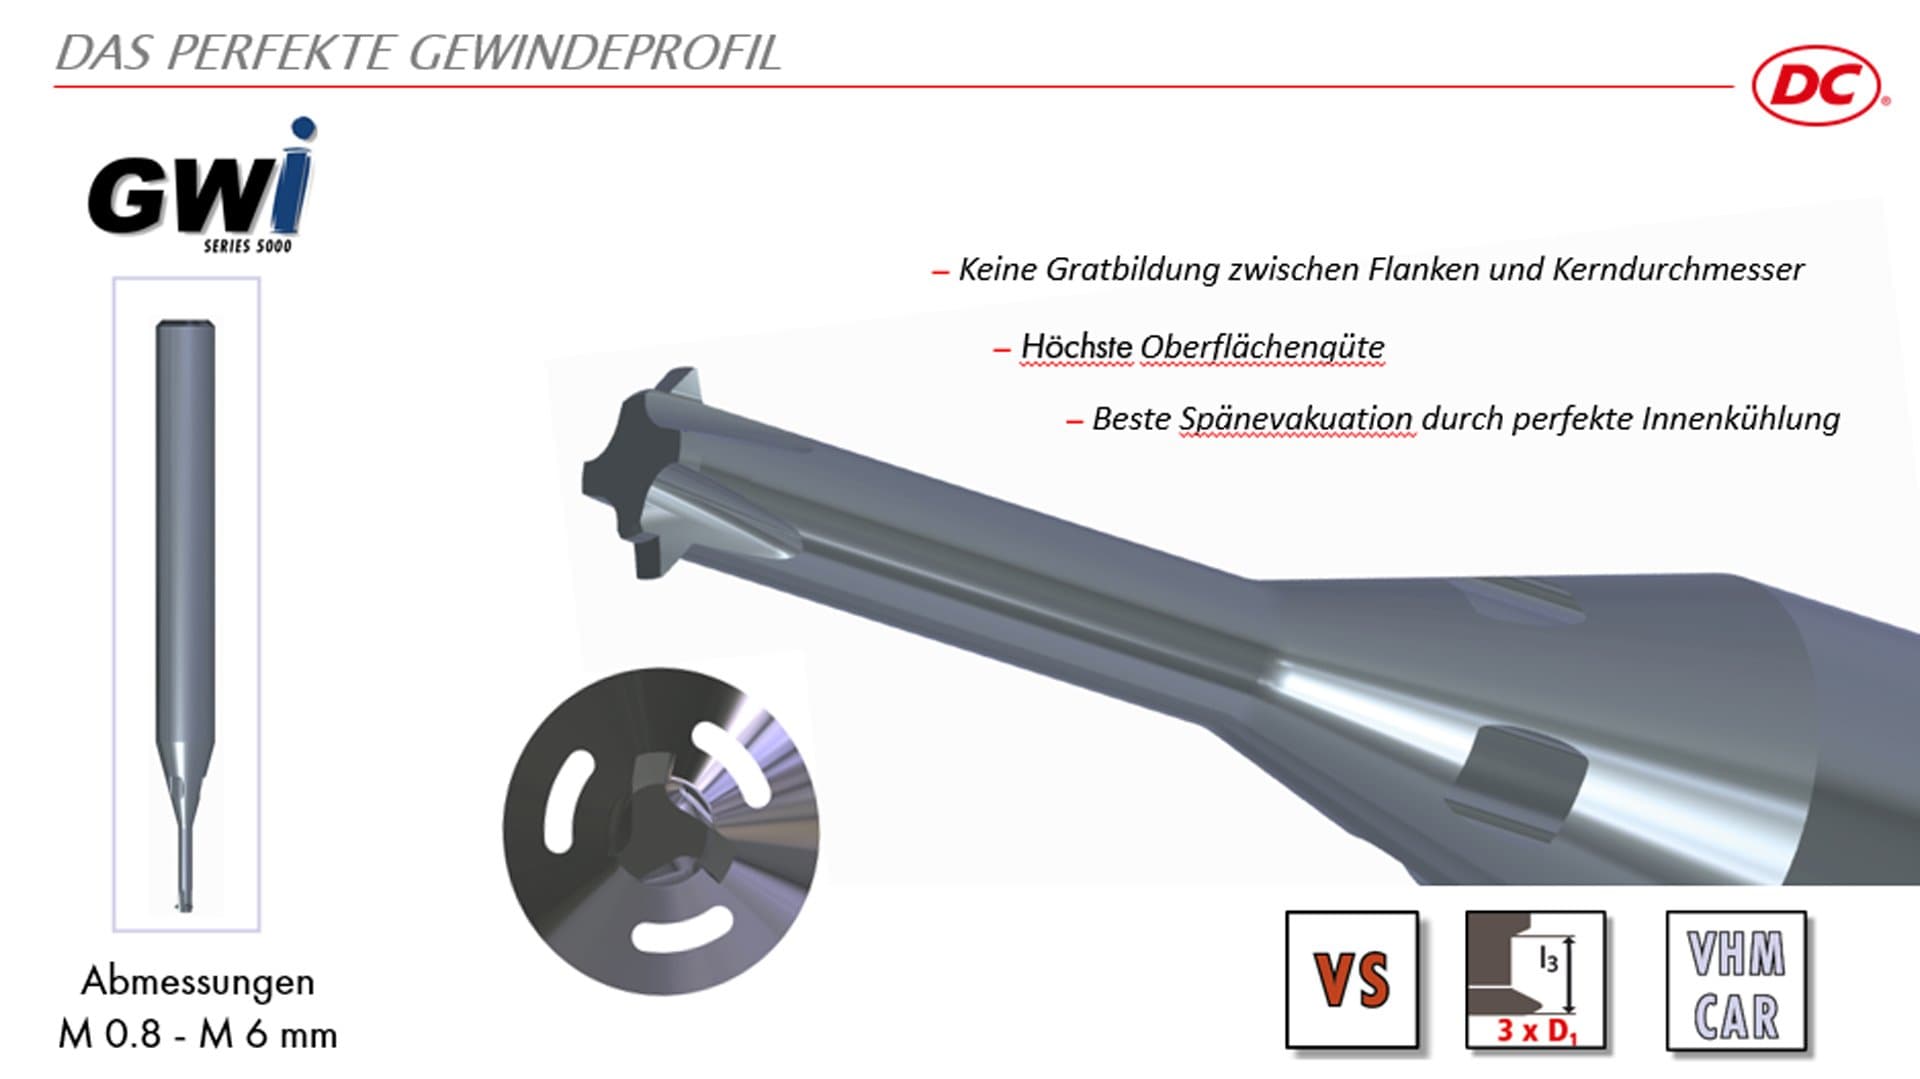 Thread whirler GWi 5000, with internal coolant and patented cutting geometry